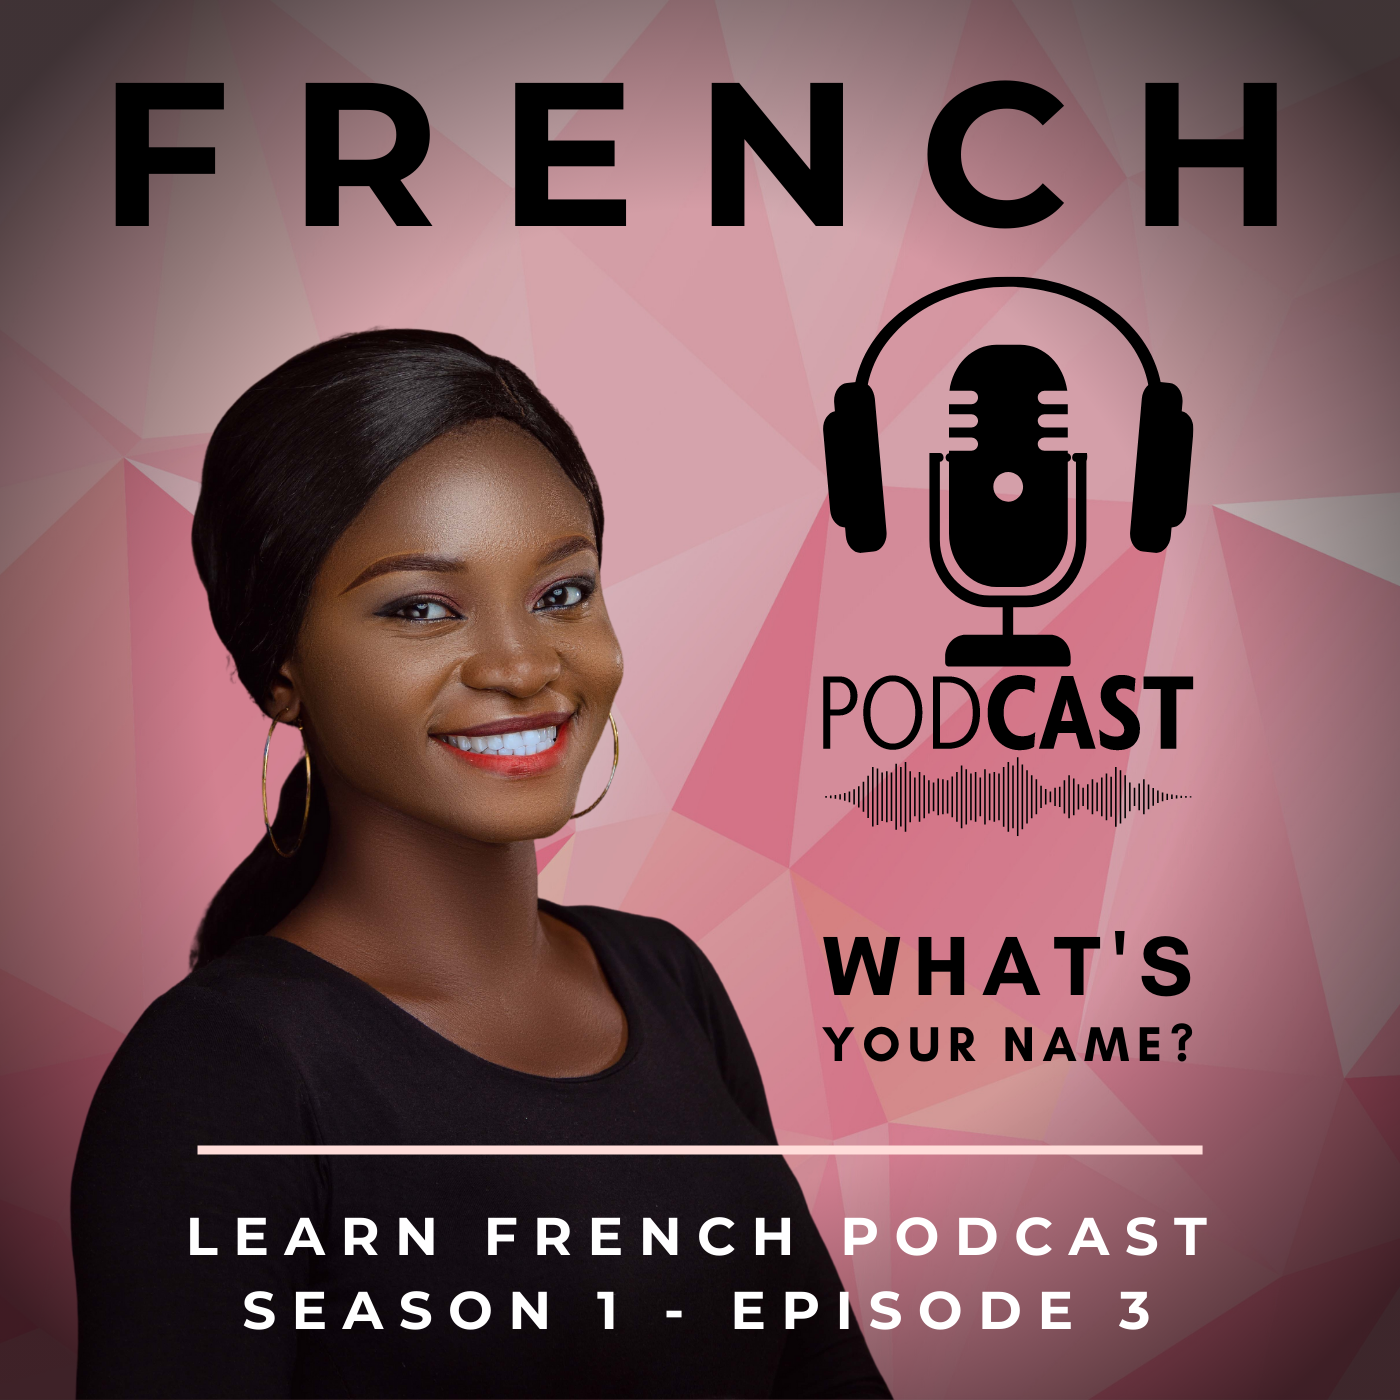 Learn French Podcast: What's Your Name? (Season 1, Episode 3)